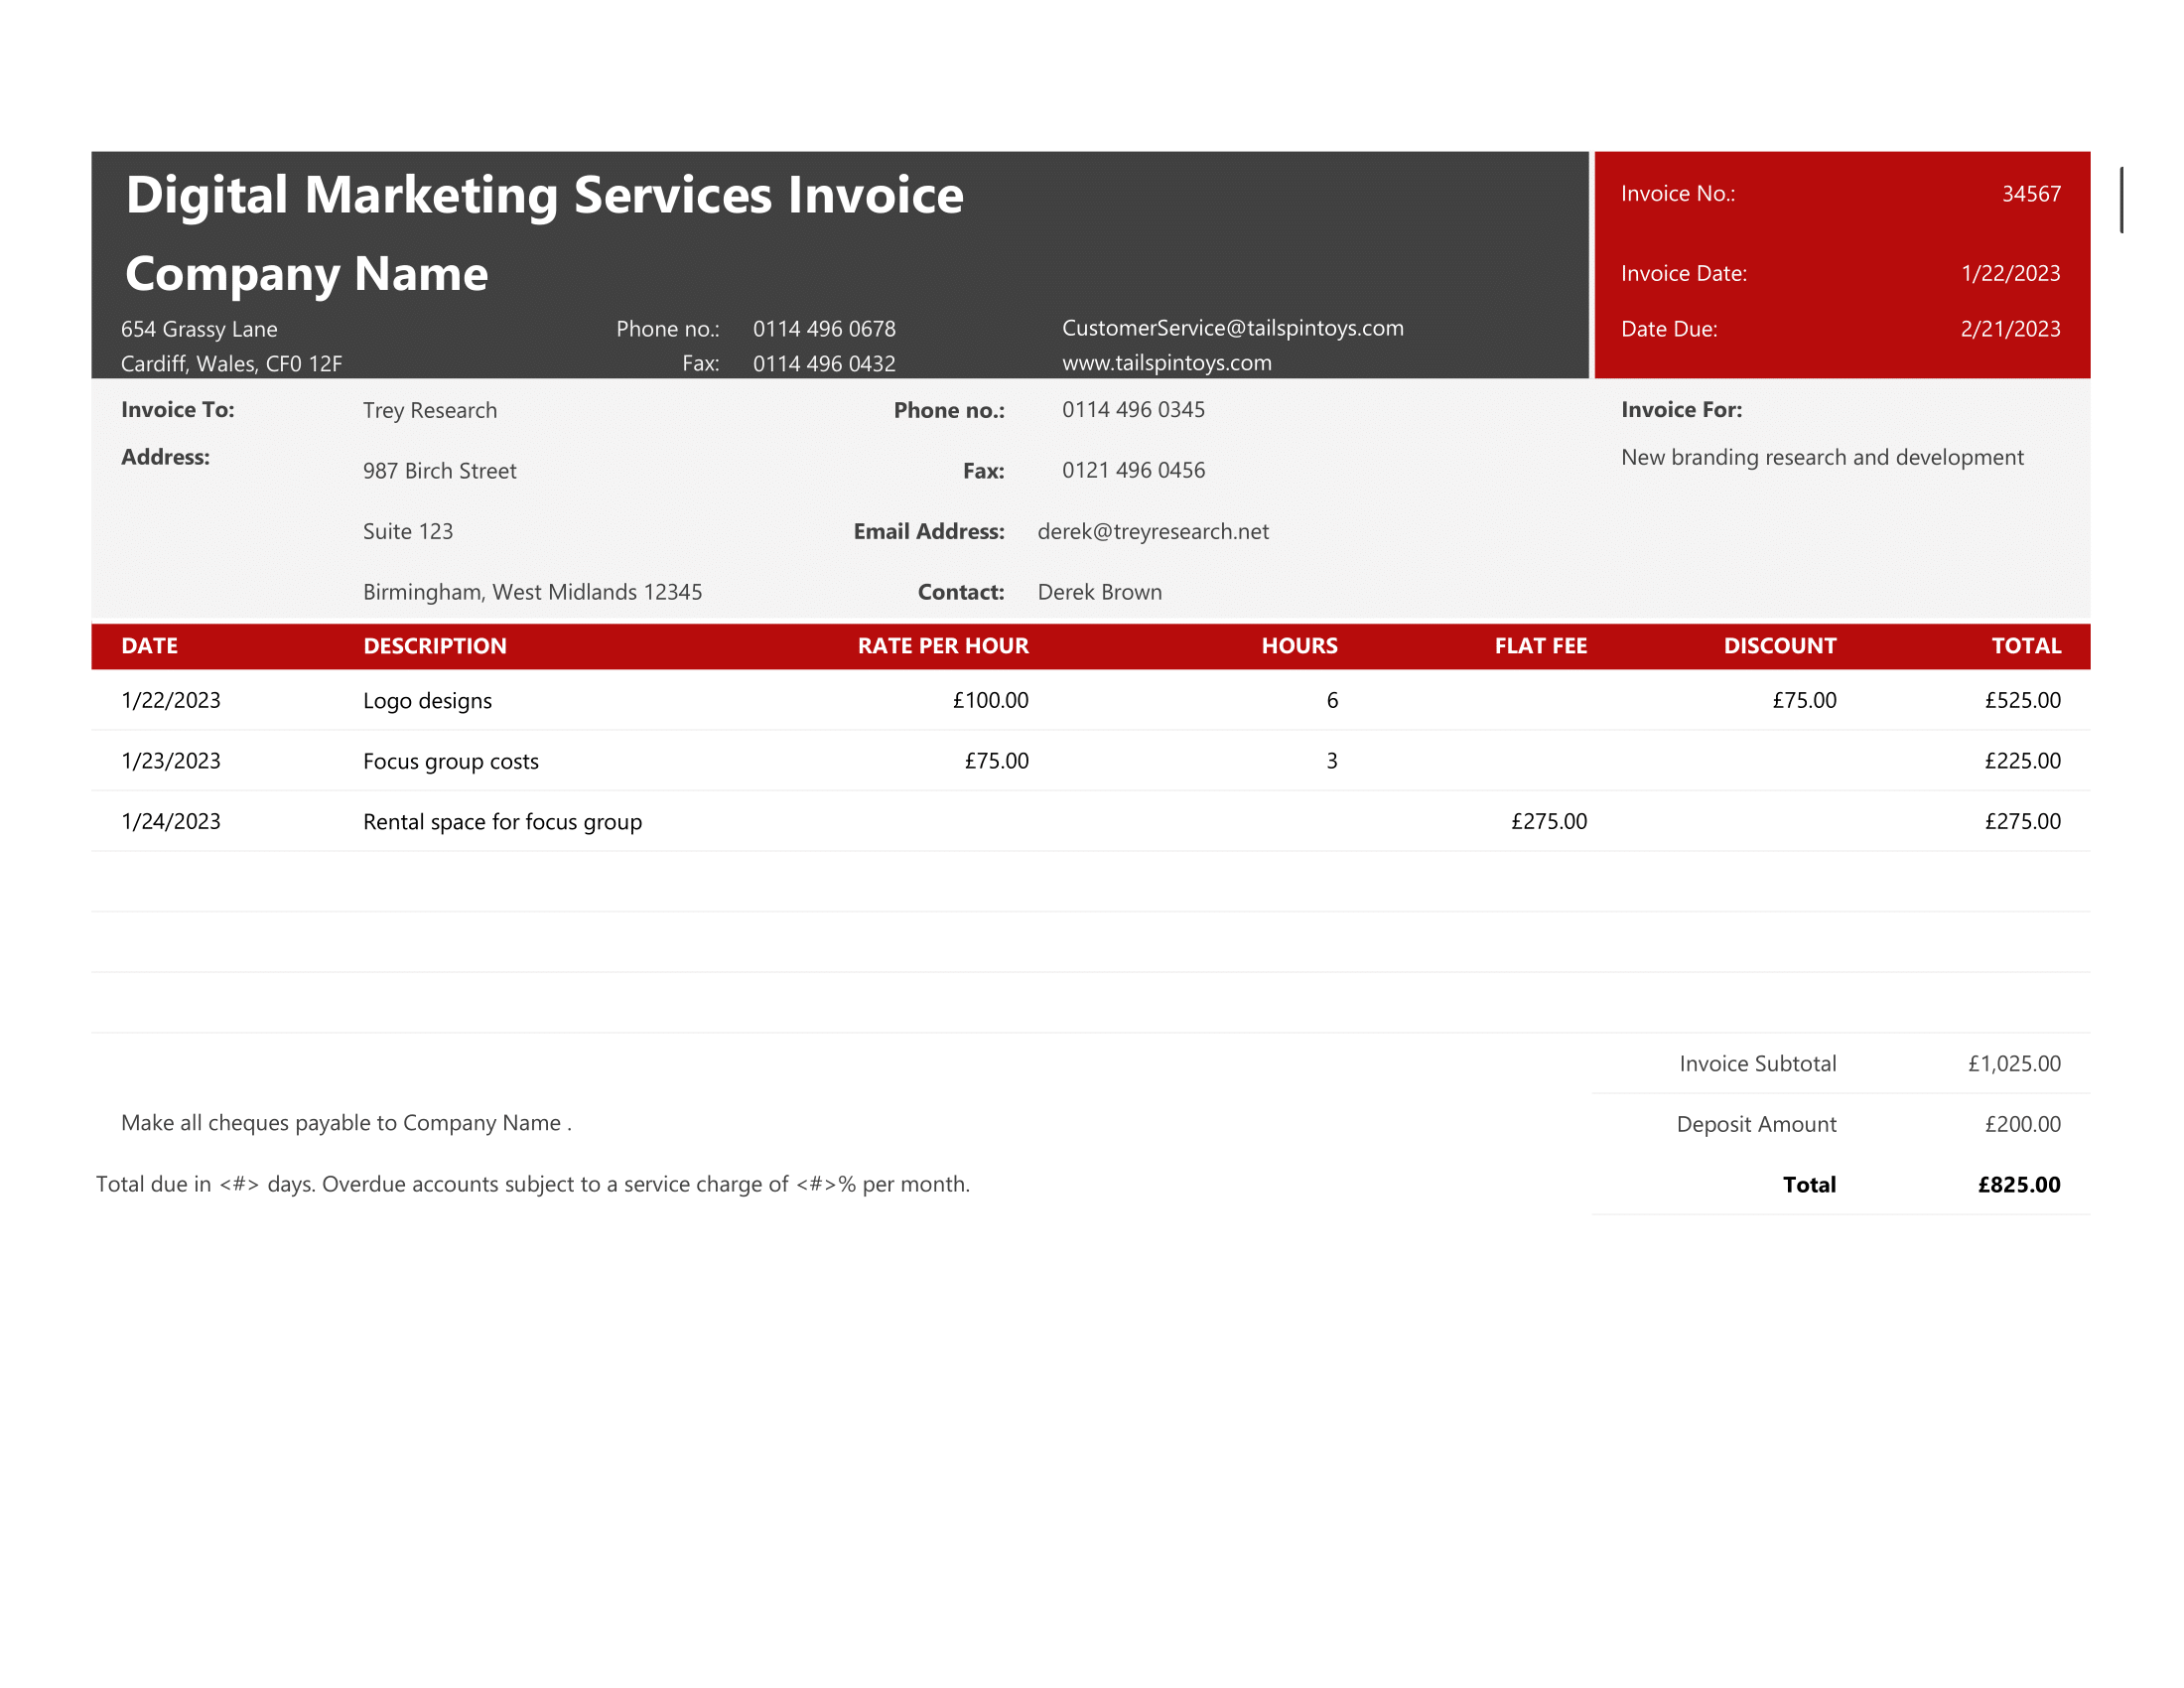 Digital Marketing Services Invoice Template in Excel. Download and Start Invoicing your clients